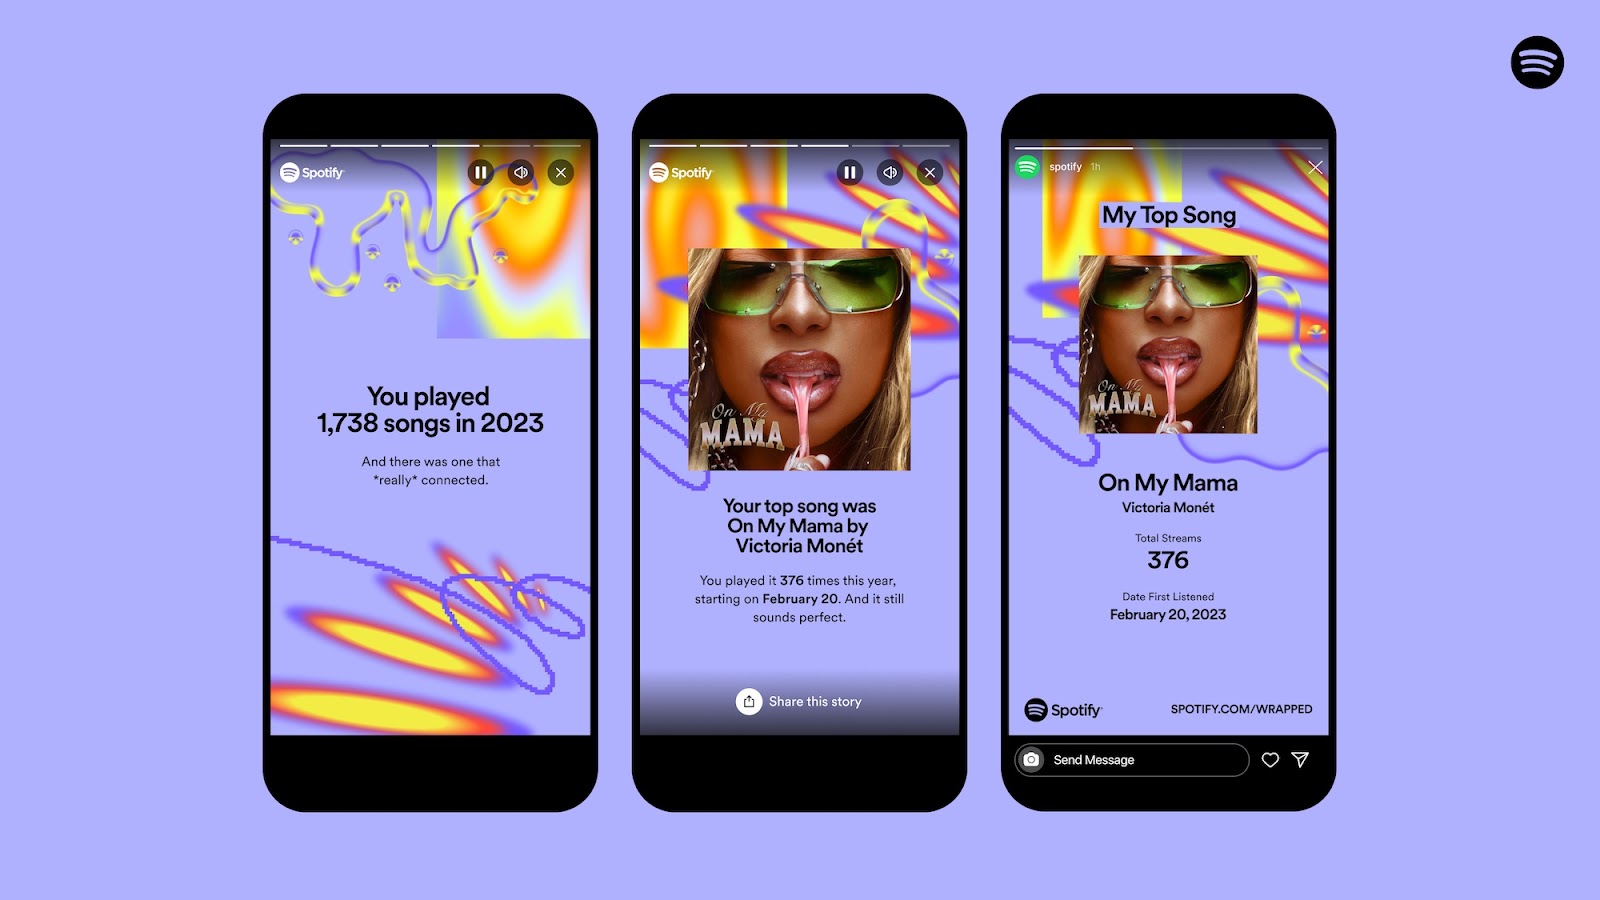 Spotify Wrapped on Instagram Stories